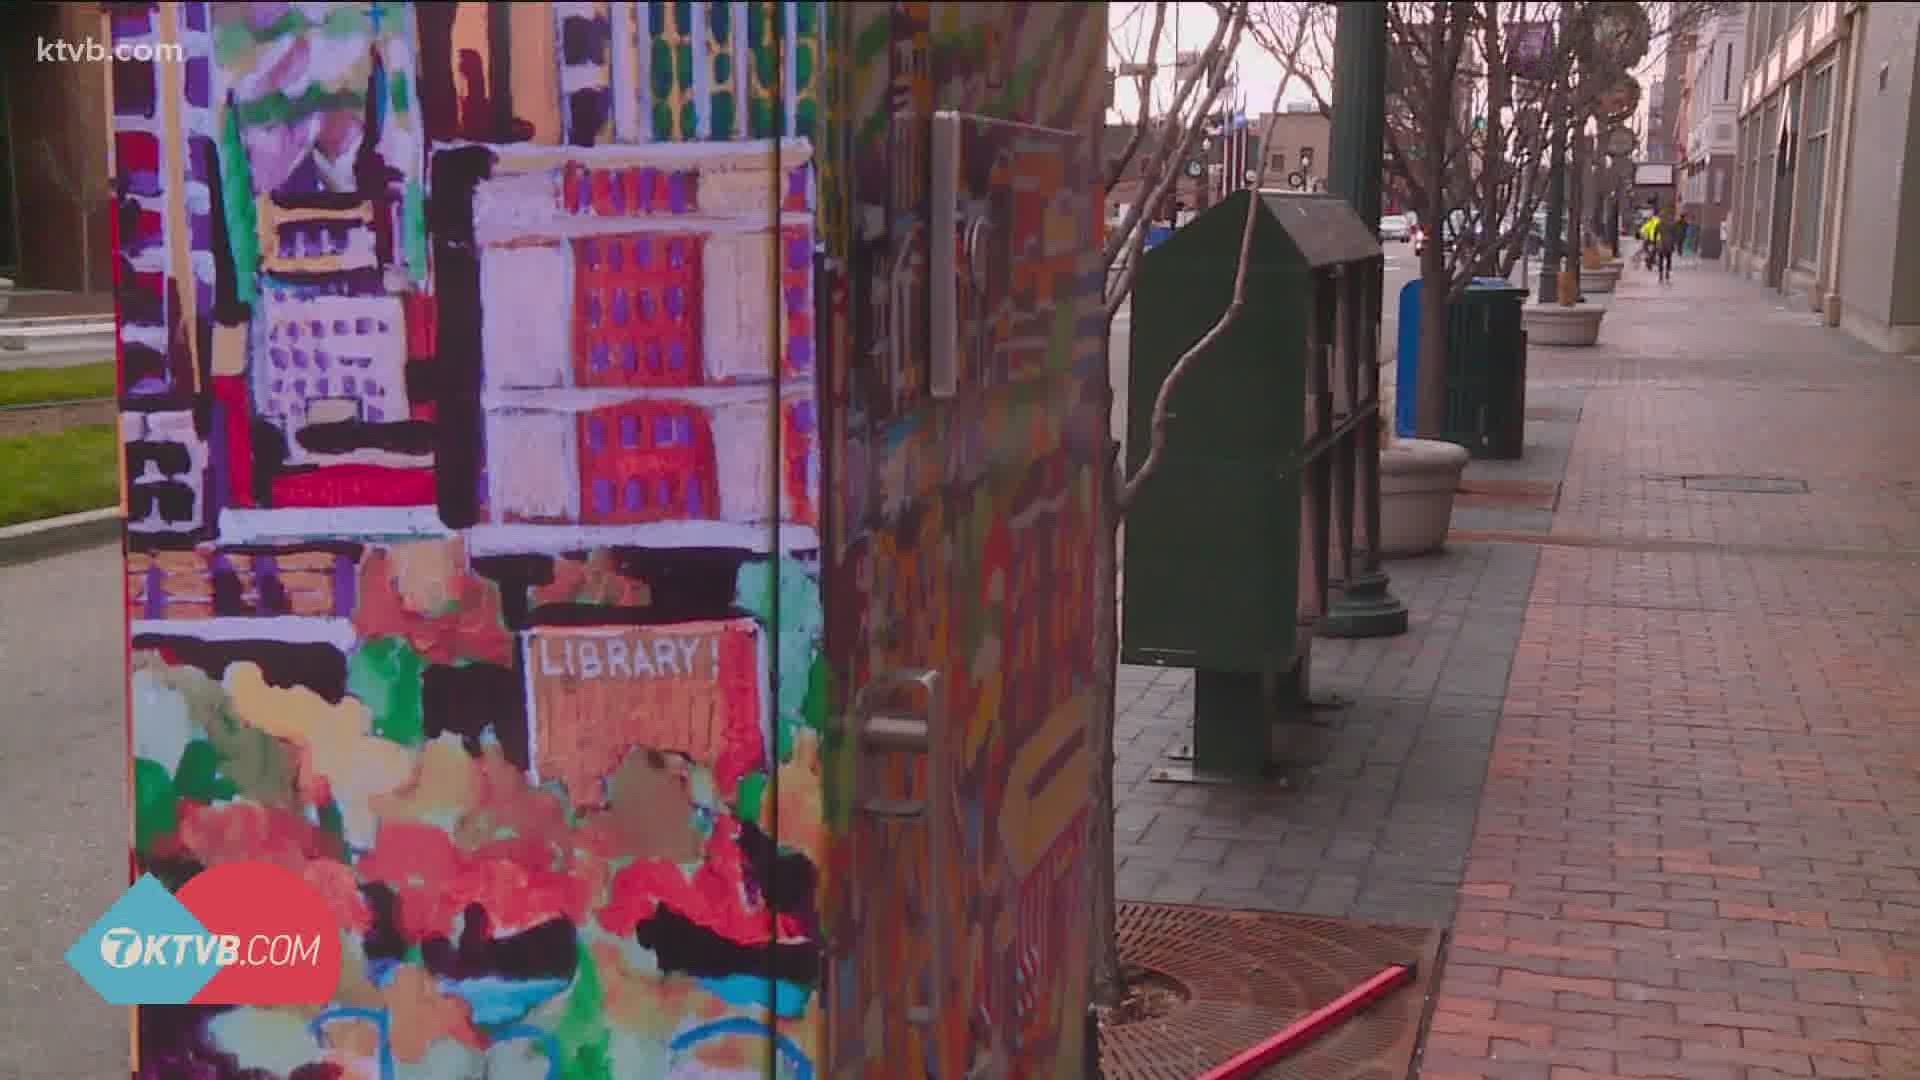 There are now more than 200 traffic art boxes in Boise. The program began in 2009.